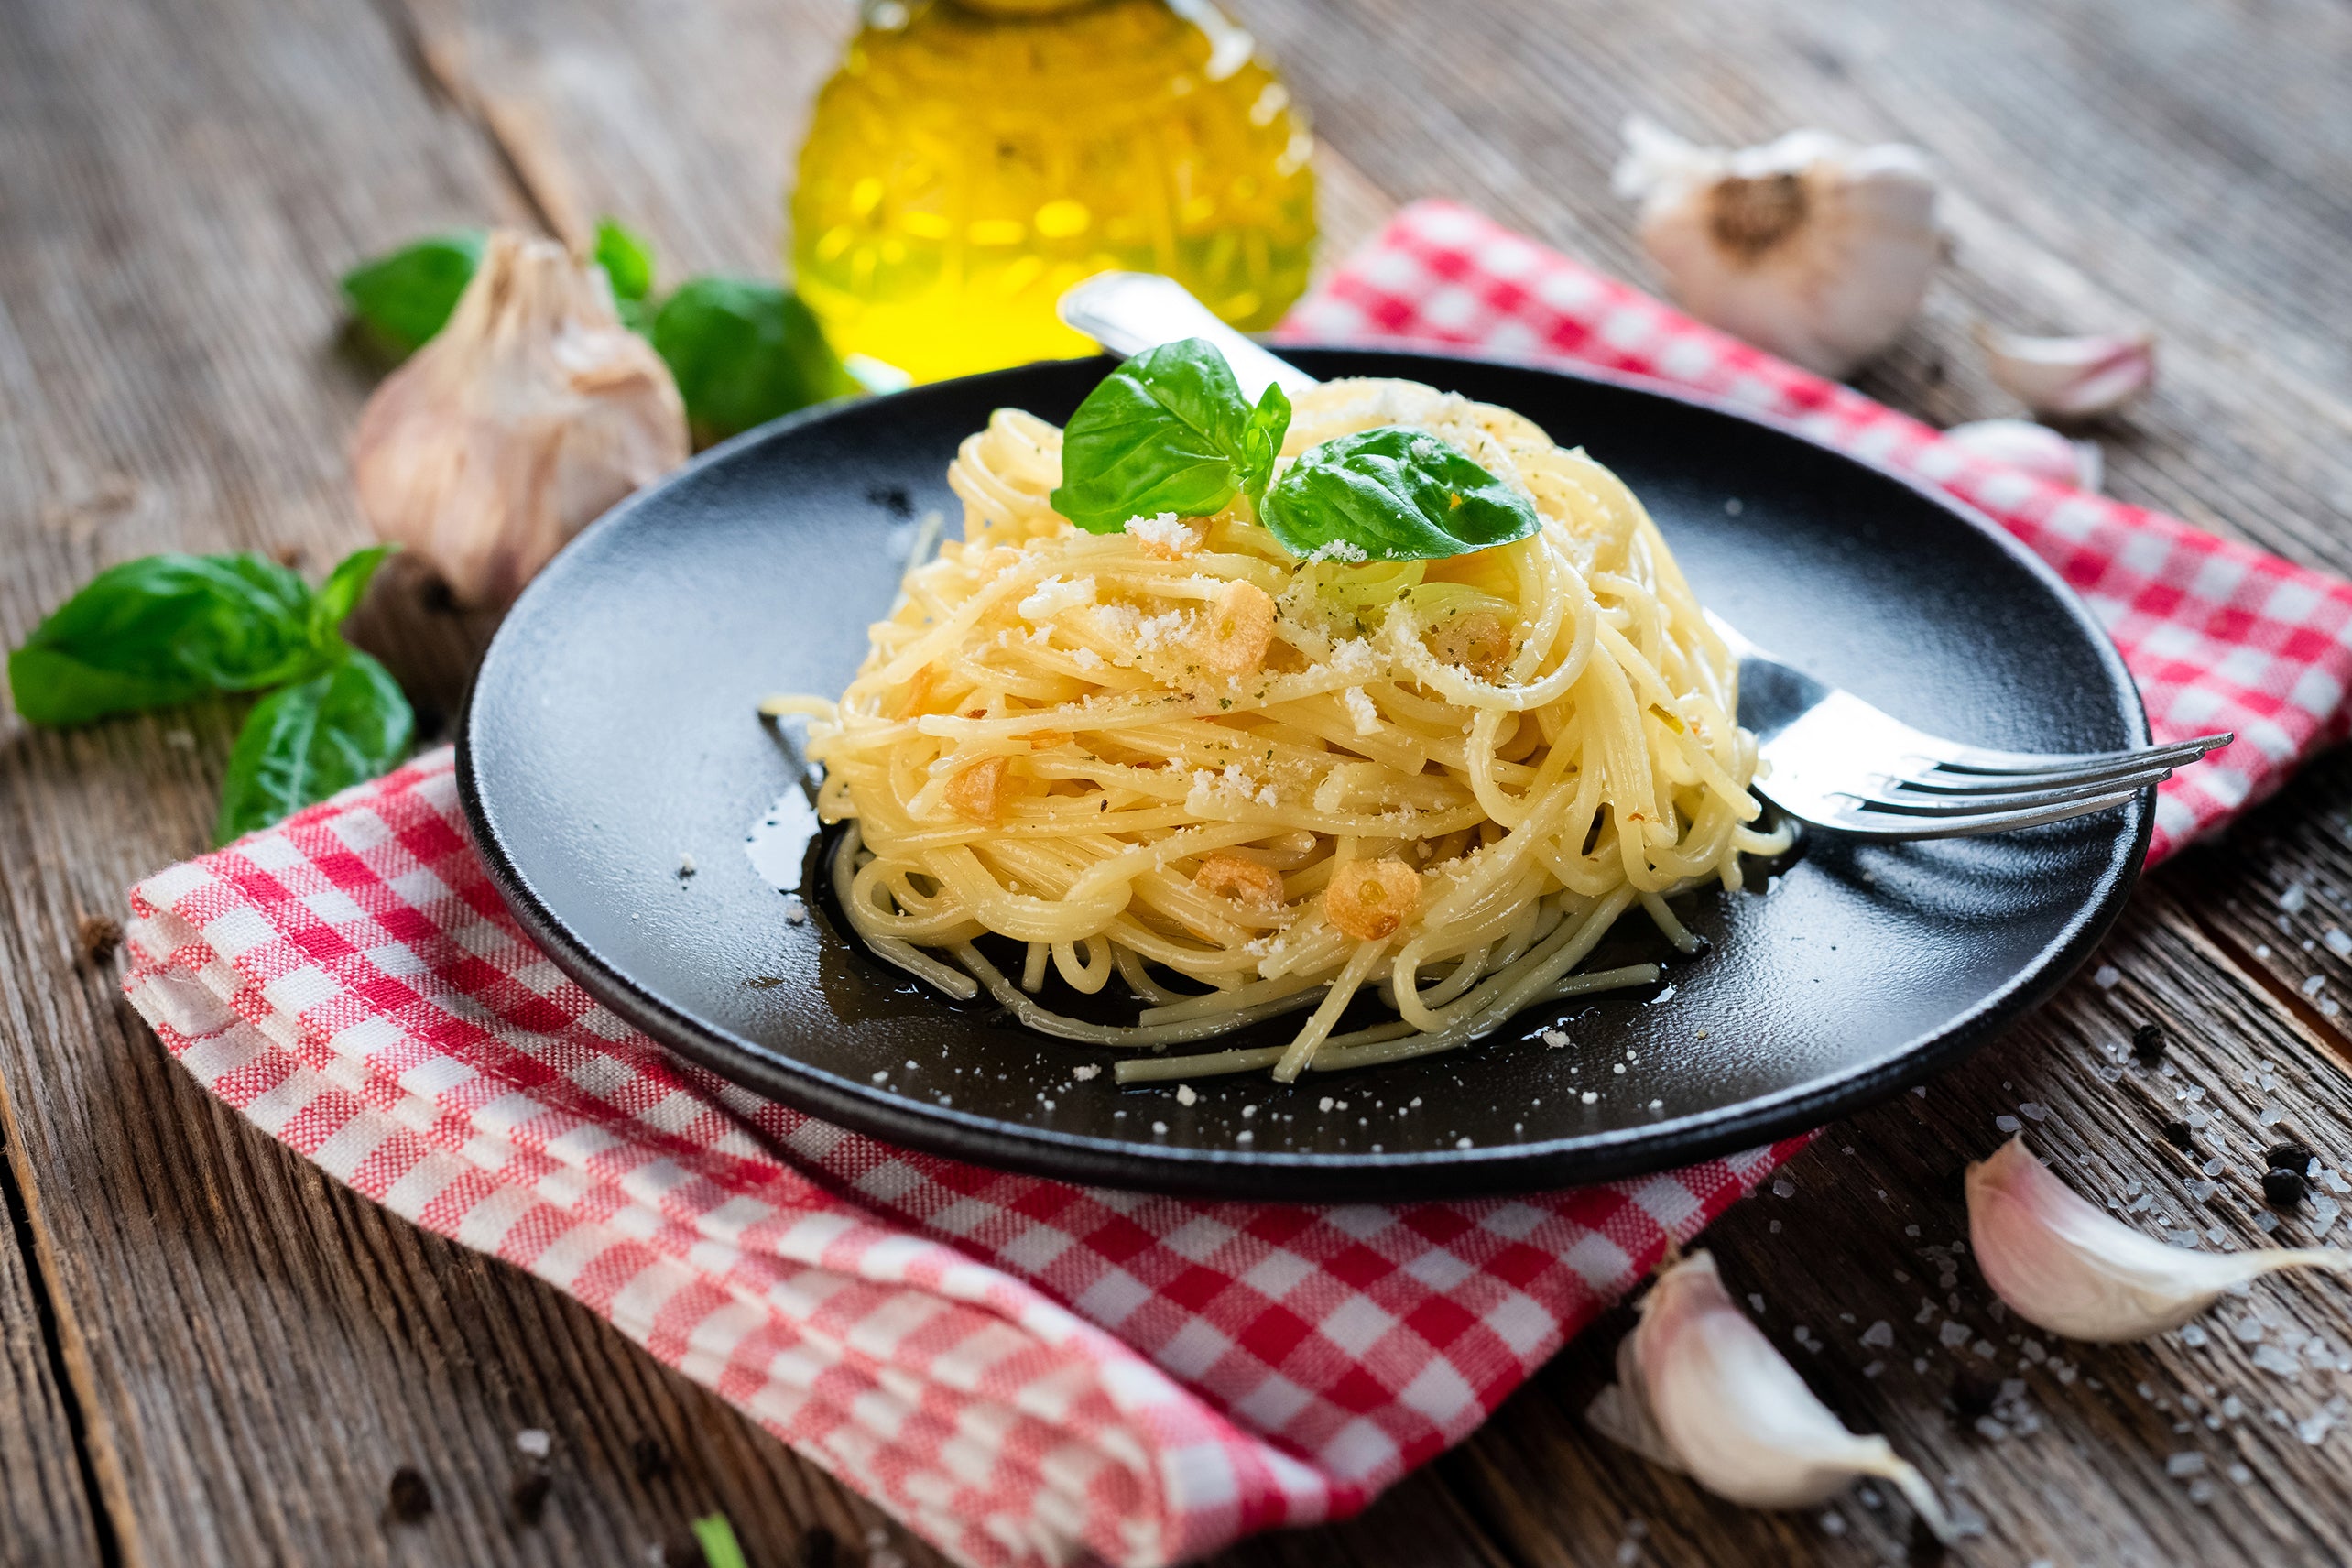 Spaghetti with garlic and oil is a classic Italian pasta dish made with spaghetti, garlic, olive oil, and red pepper flakes.